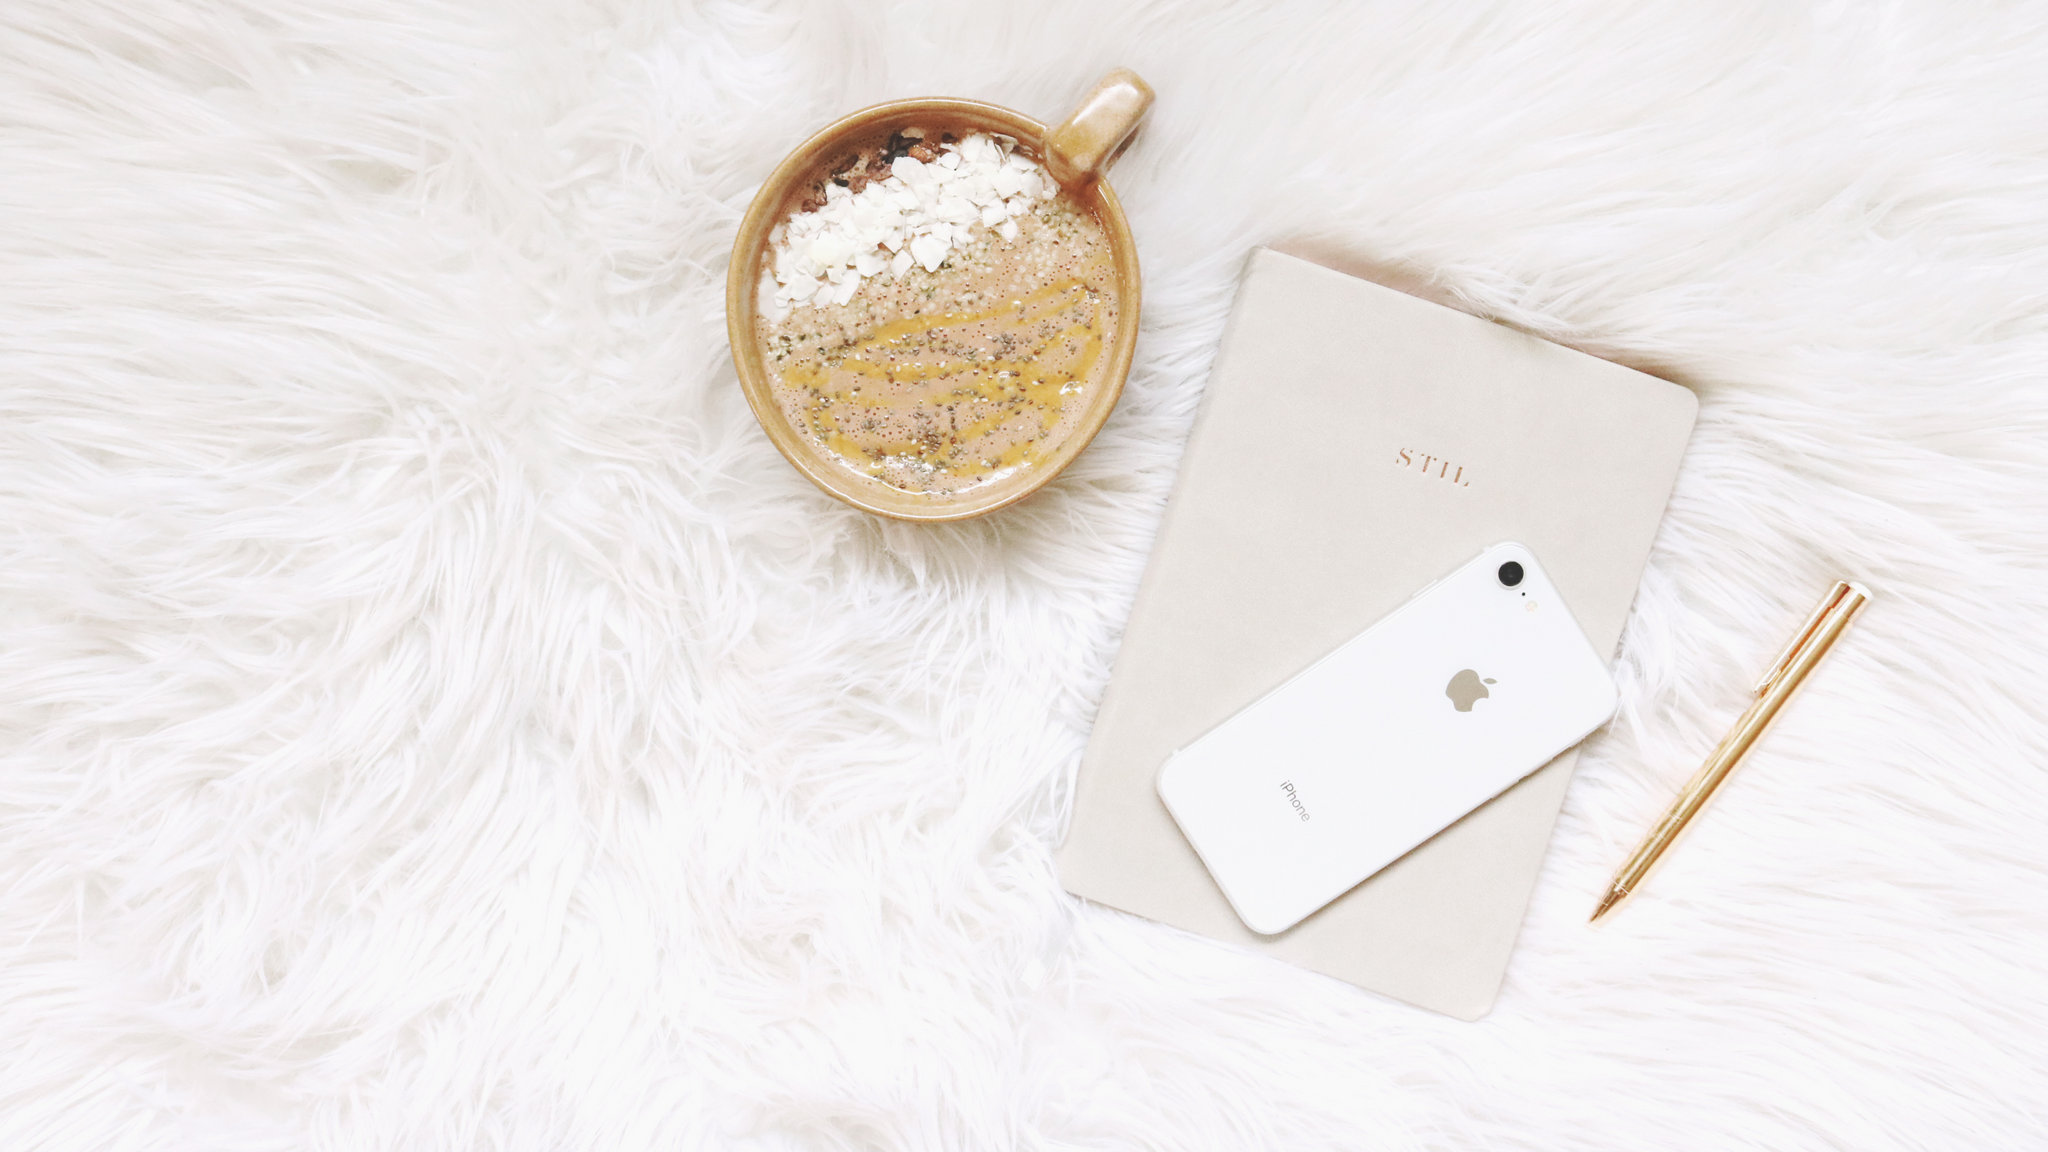 smoothie bowl on blanket with journal, iphone and gold pen - organic traditions blog post cover